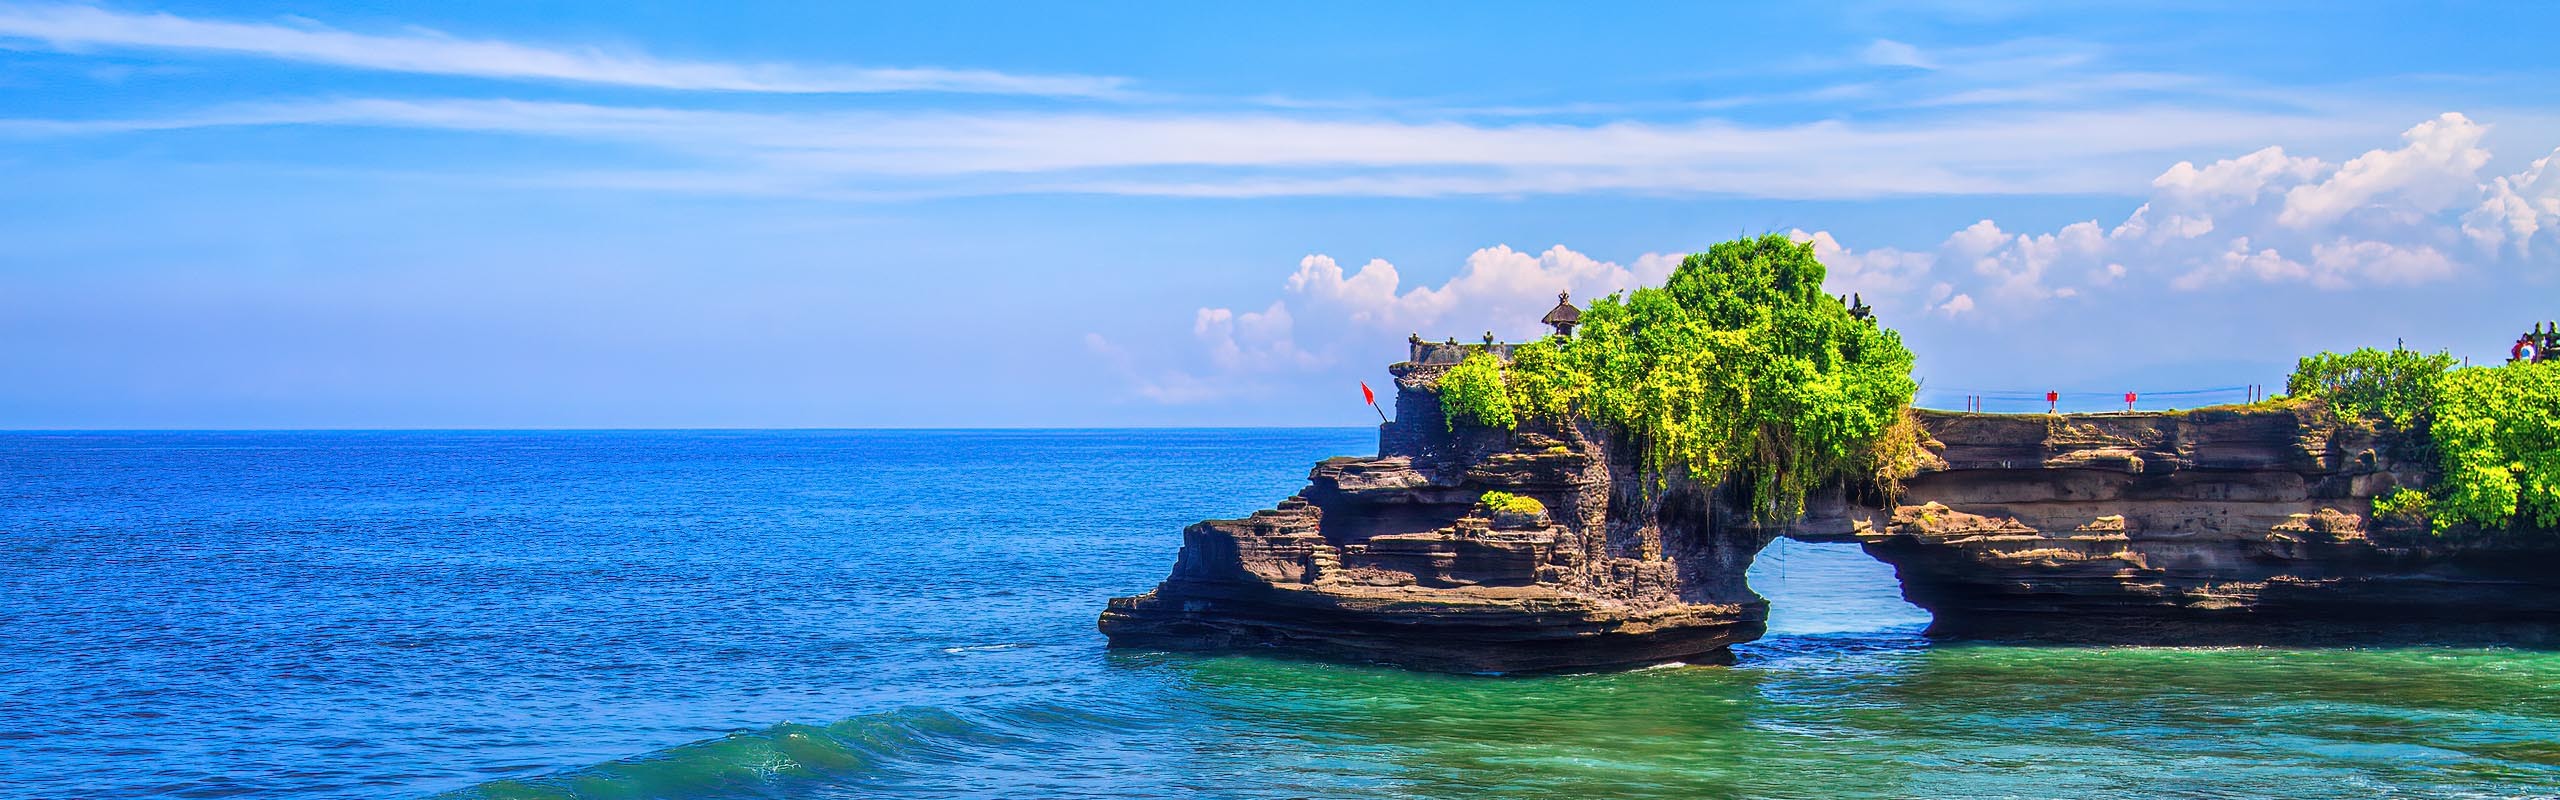 Private Bali Tours, Bali Private Tour Packages